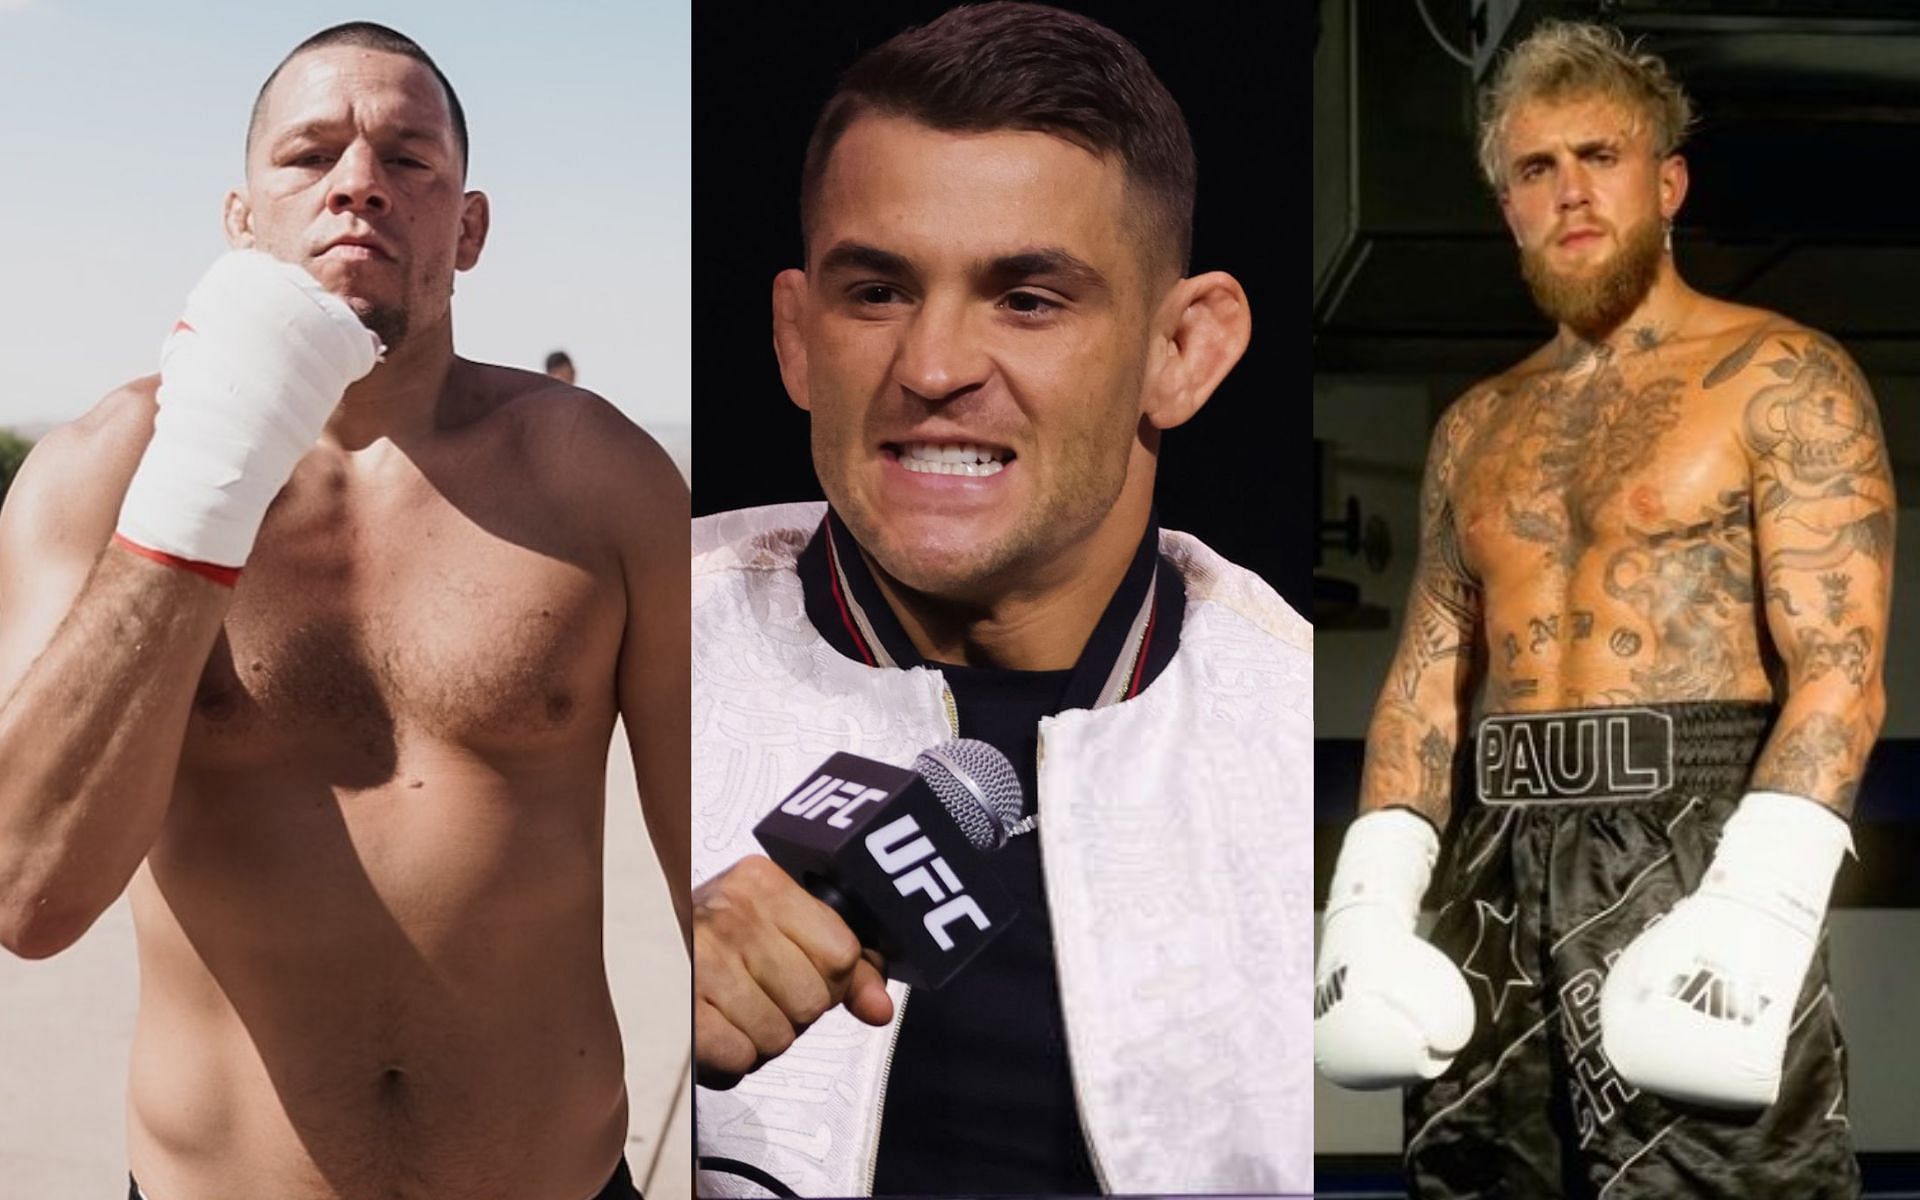 Nate Diaz (left), Dustin Poirier (middle) and Jake Paul (right) [Images Courtesy: @natediaz209 and @jakepaul on Instagram and @GettyImages]